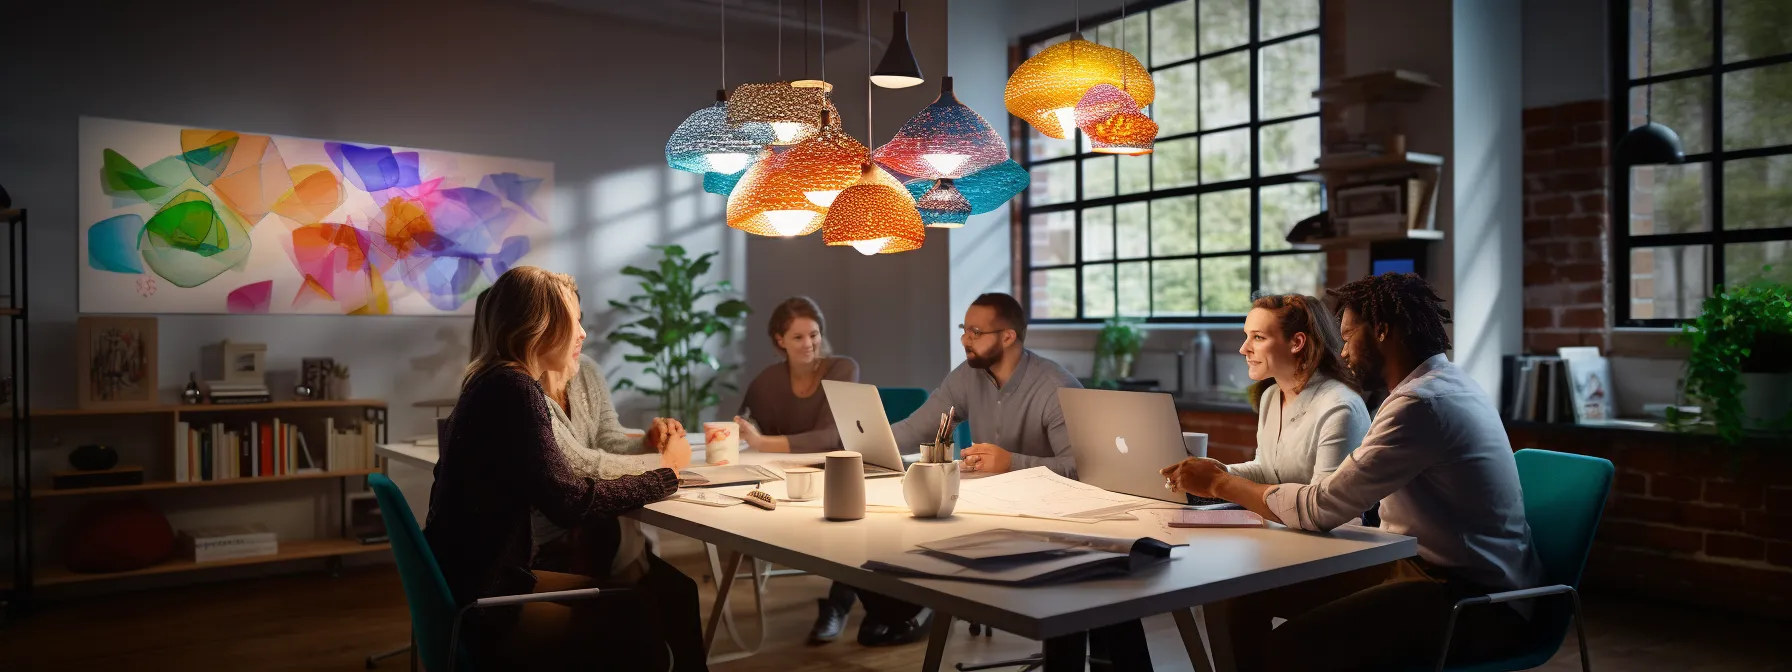 a group of people brainstorming and sharing ideas in a creative workspace with a colorful decor.